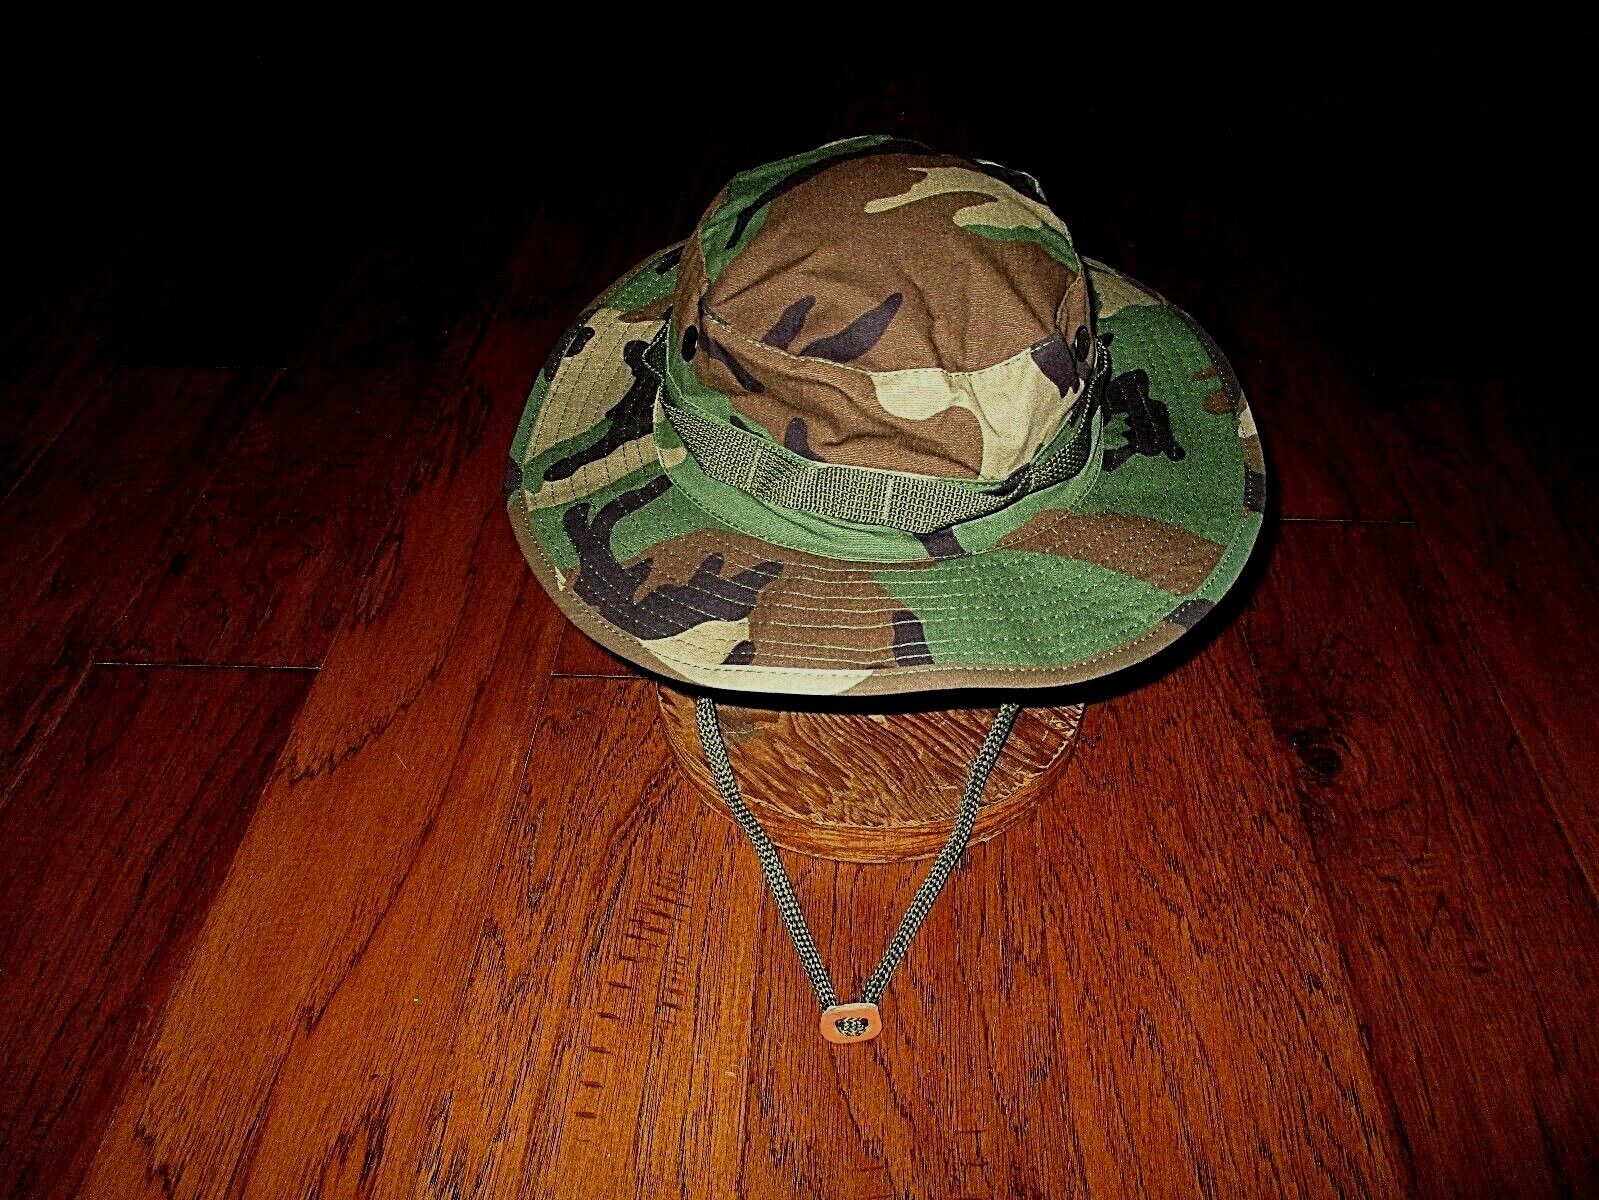 U.S MILITARY STYLE HOT WEATHER BOONIE HAT WOODLAND CAMOUFLAGE RIP-STOP LARGE